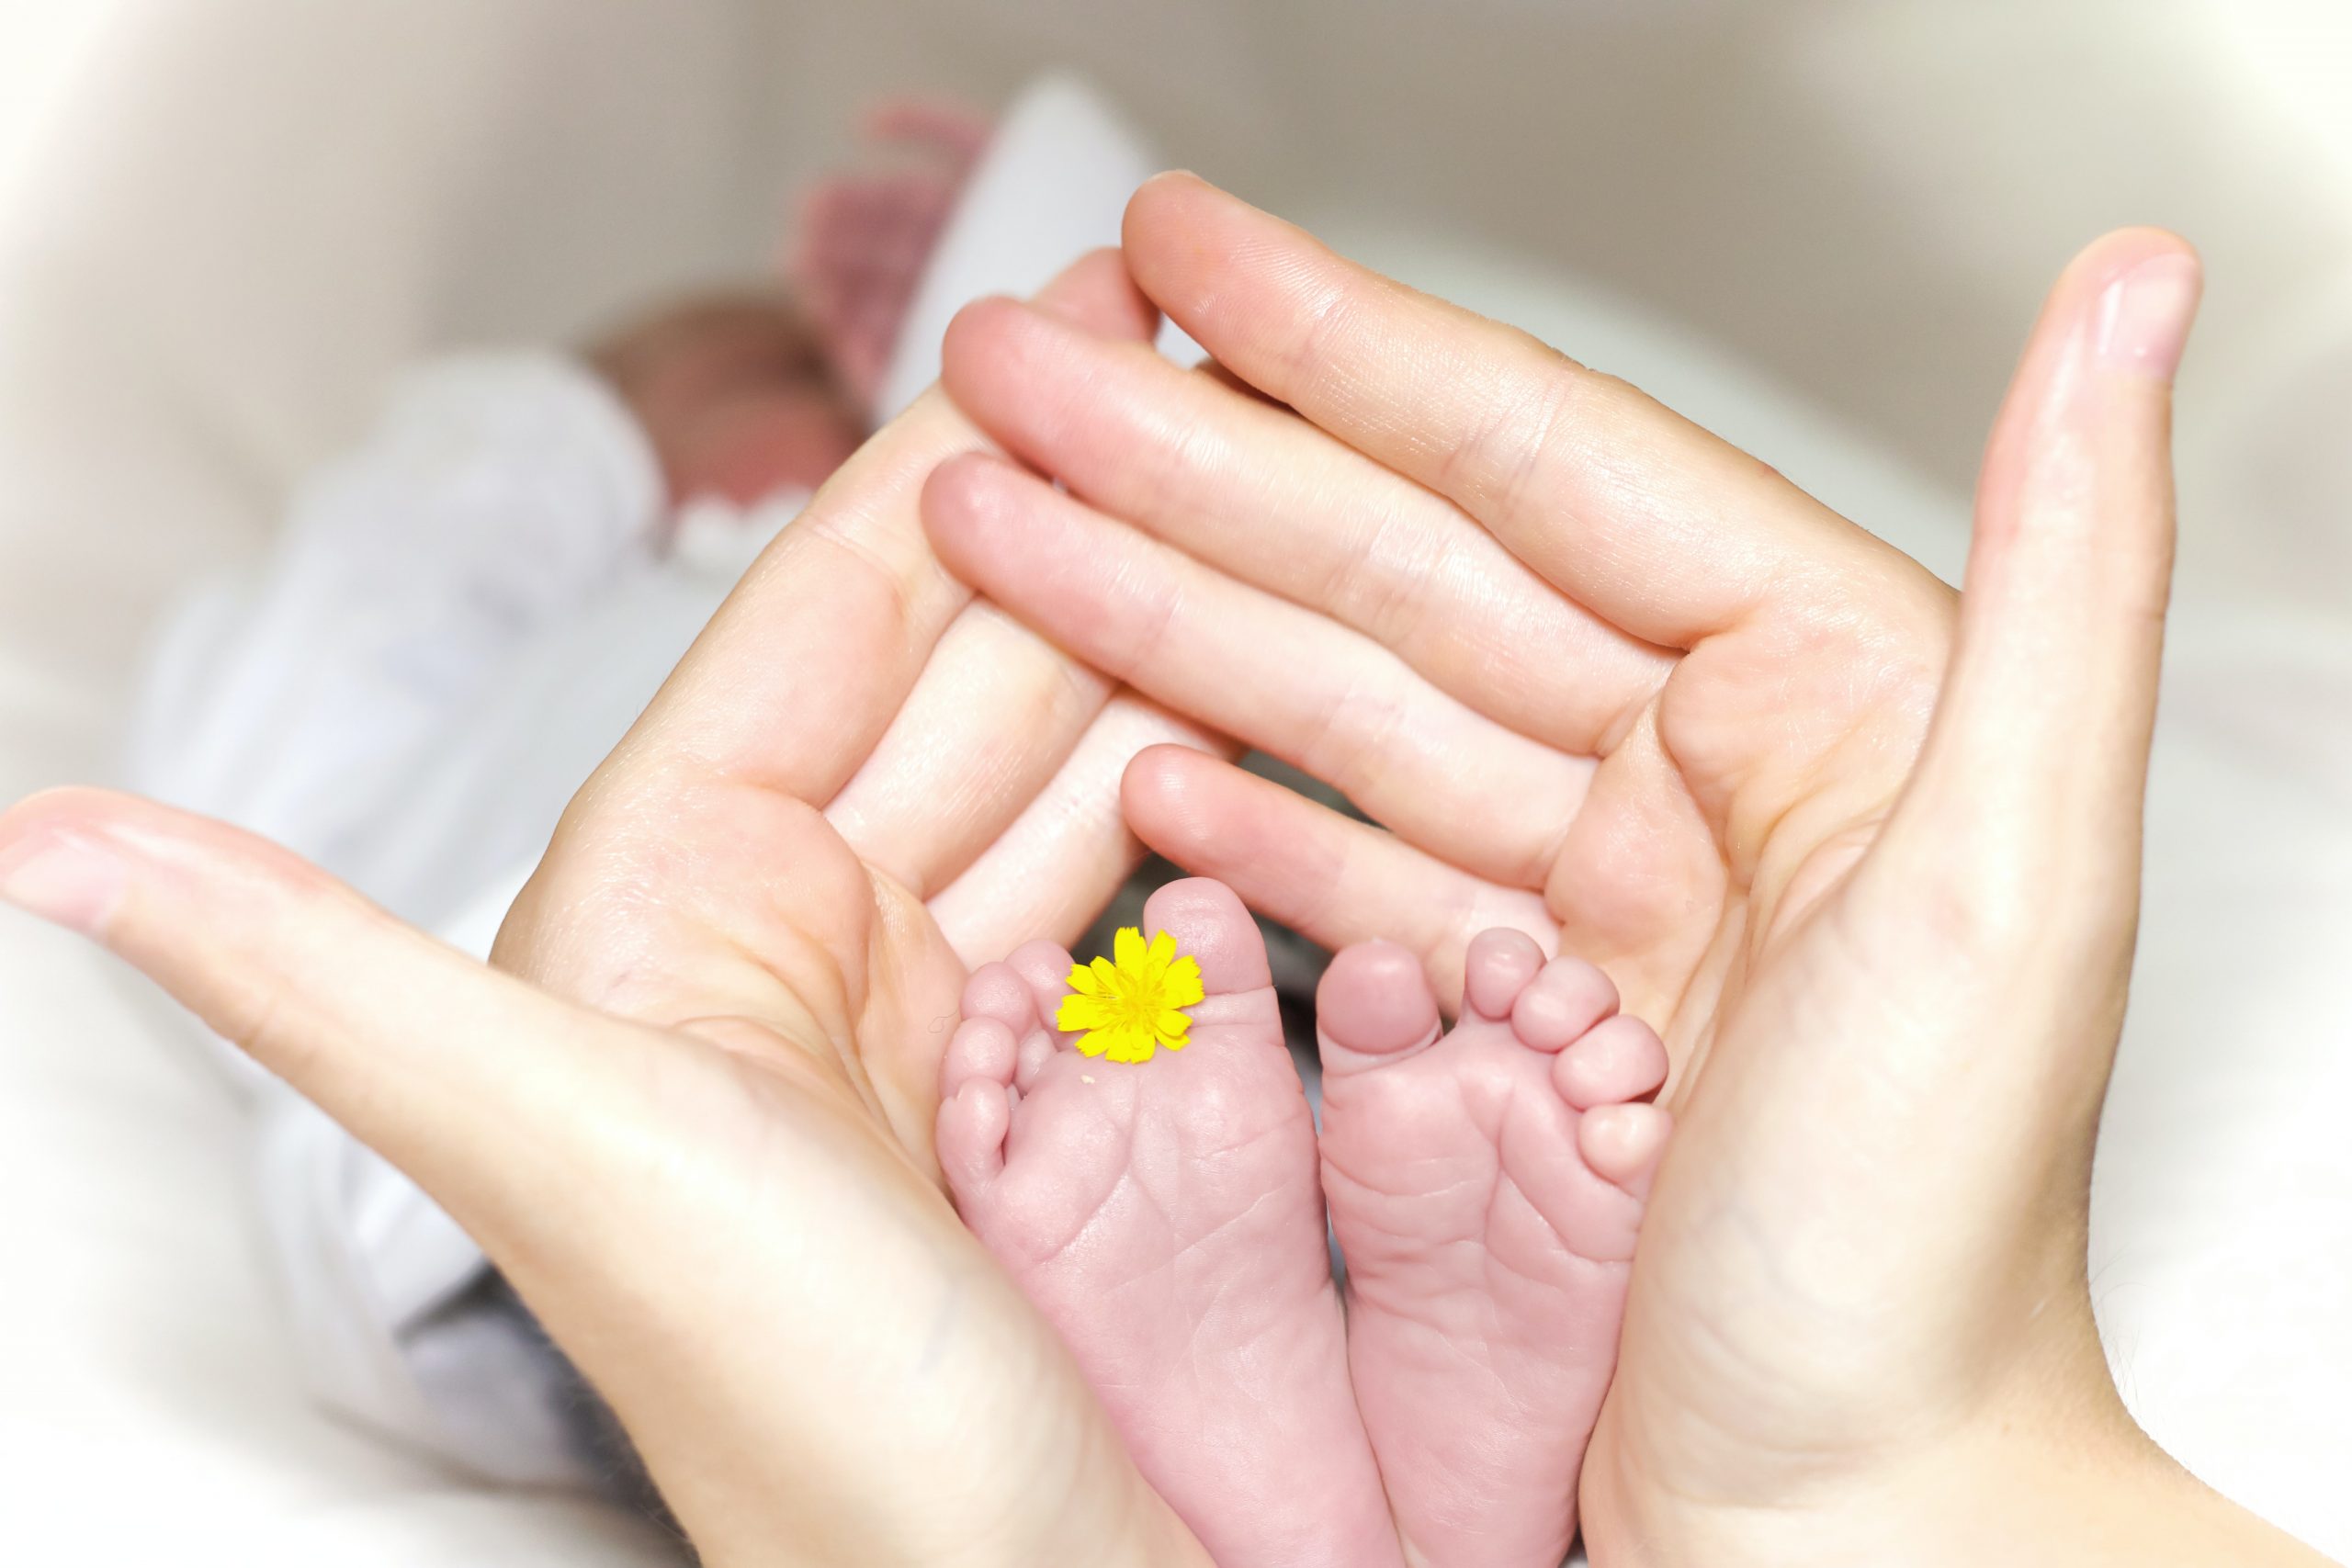 Baby's feet cupped by mothers hands - Top 7 Nutrition Tips for New Mums - Postpartum nutrition